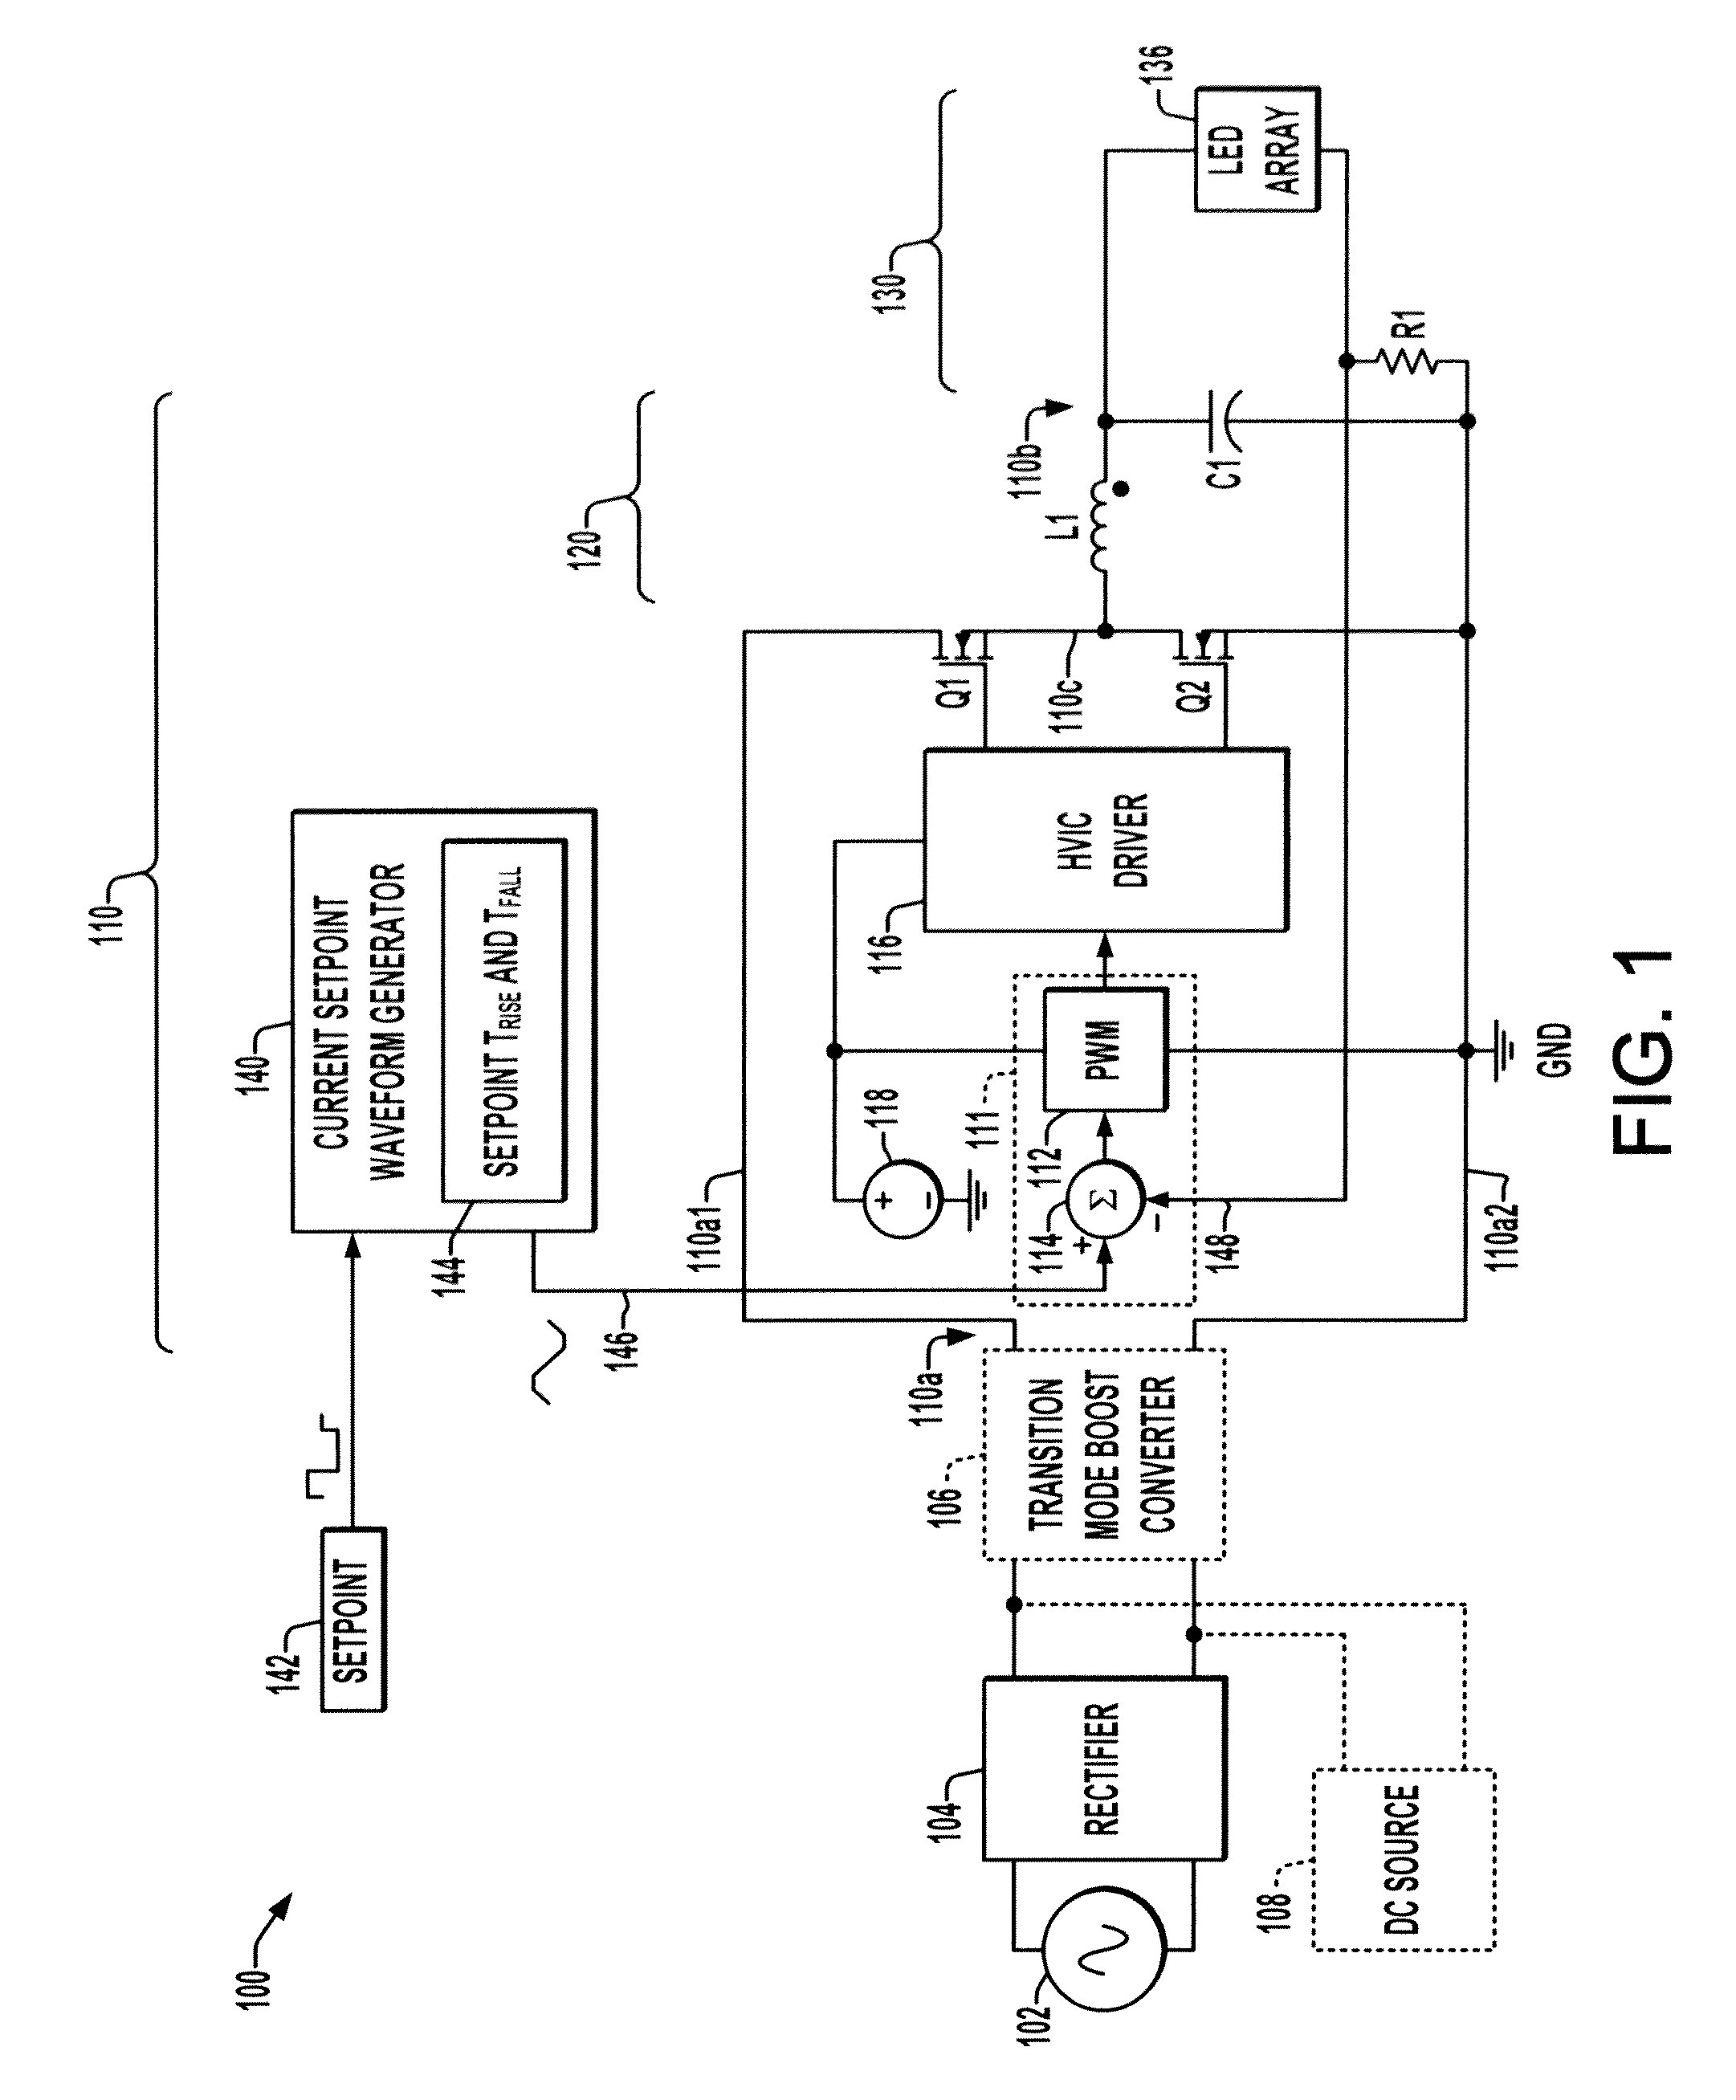 Ramp controlled driver for series/parallel solid state lighting devices